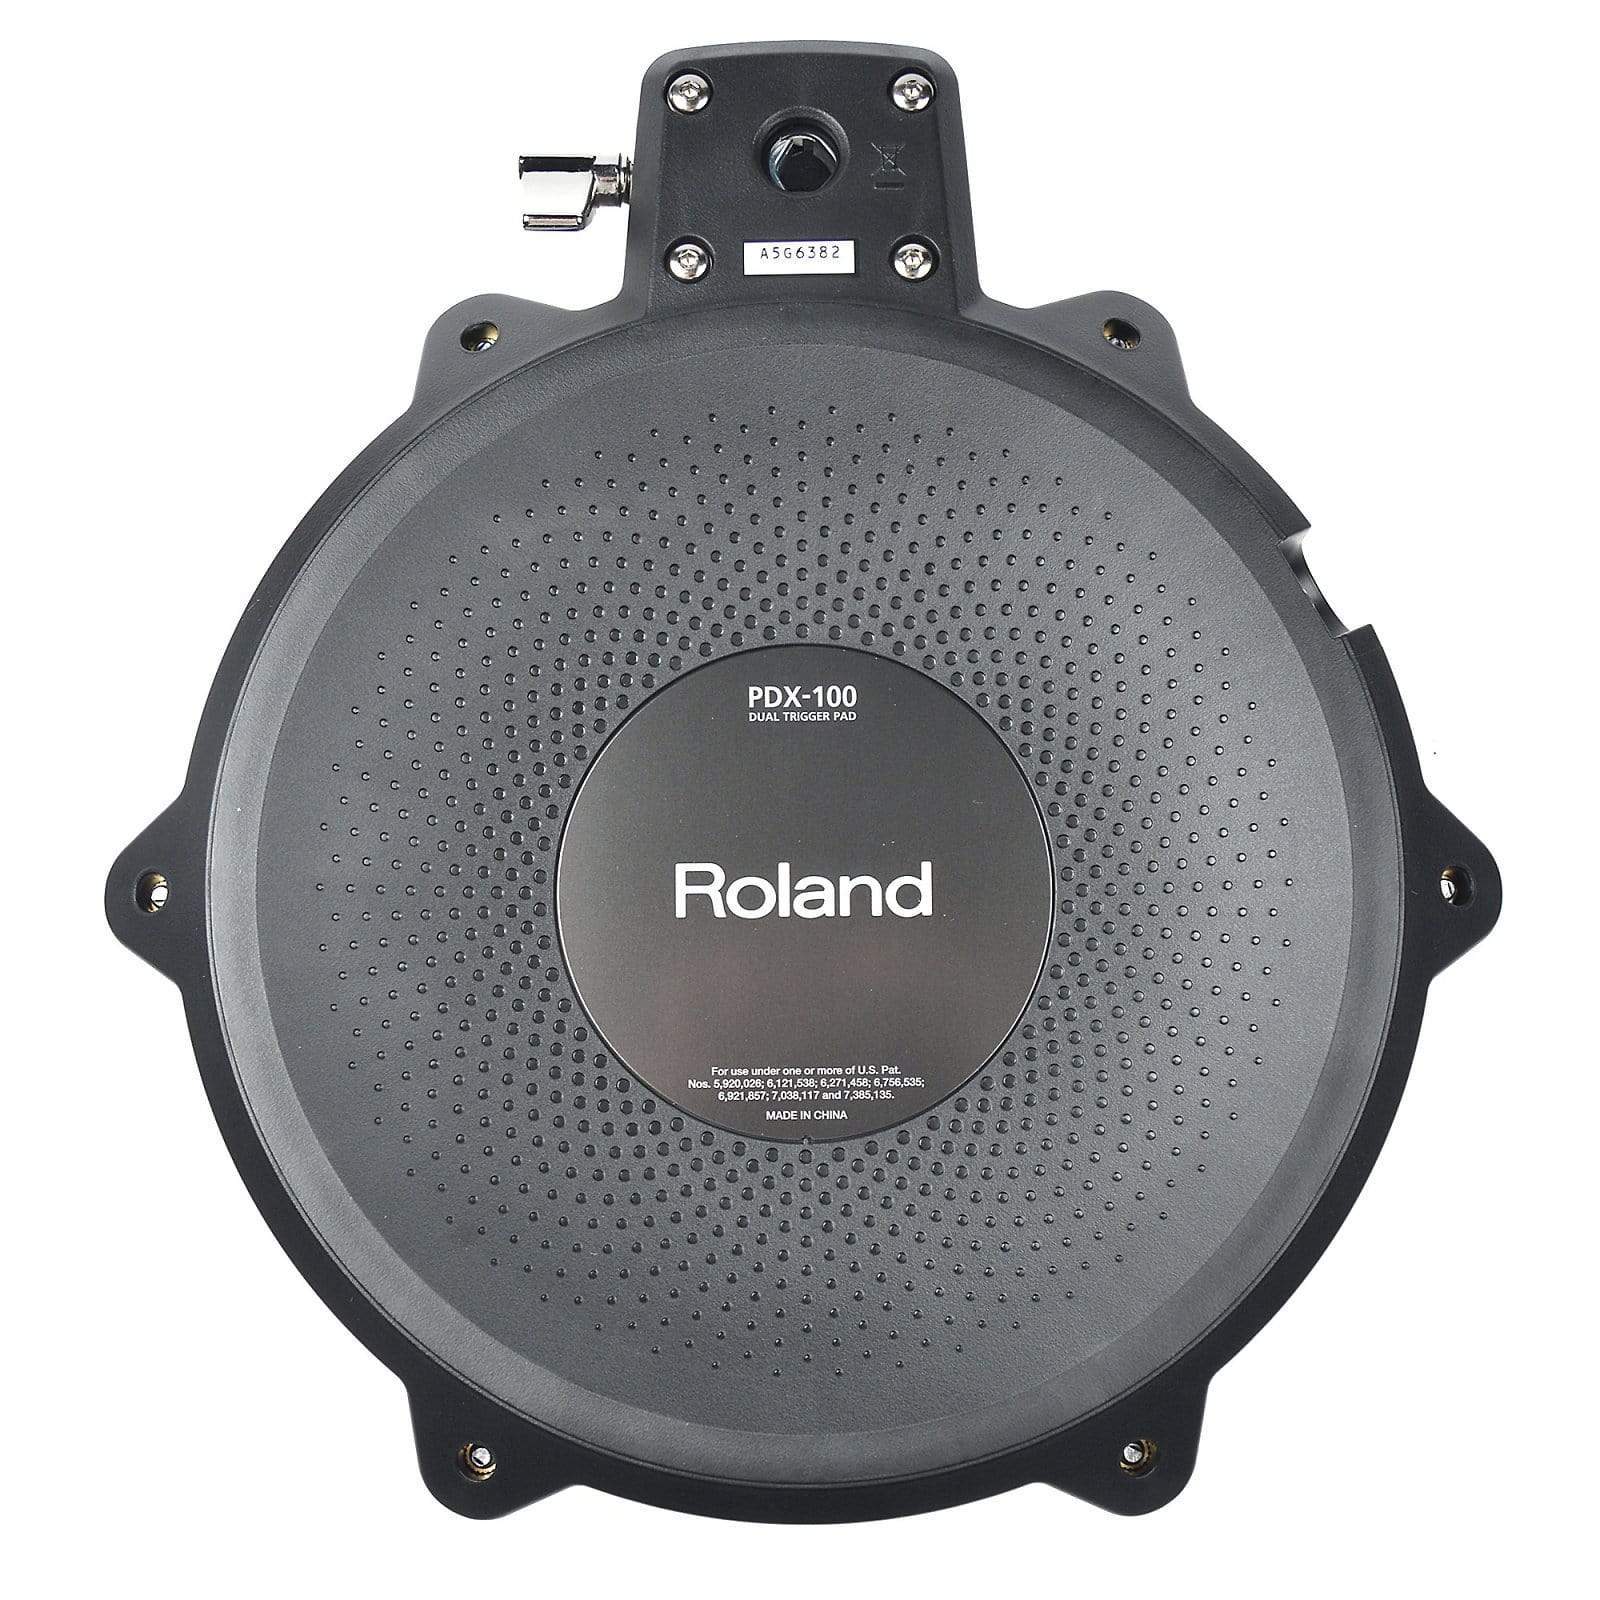 Roland PDX-100 10" V-Pad Dual Trigger Pad Drums and Percussion / Pad Controllers